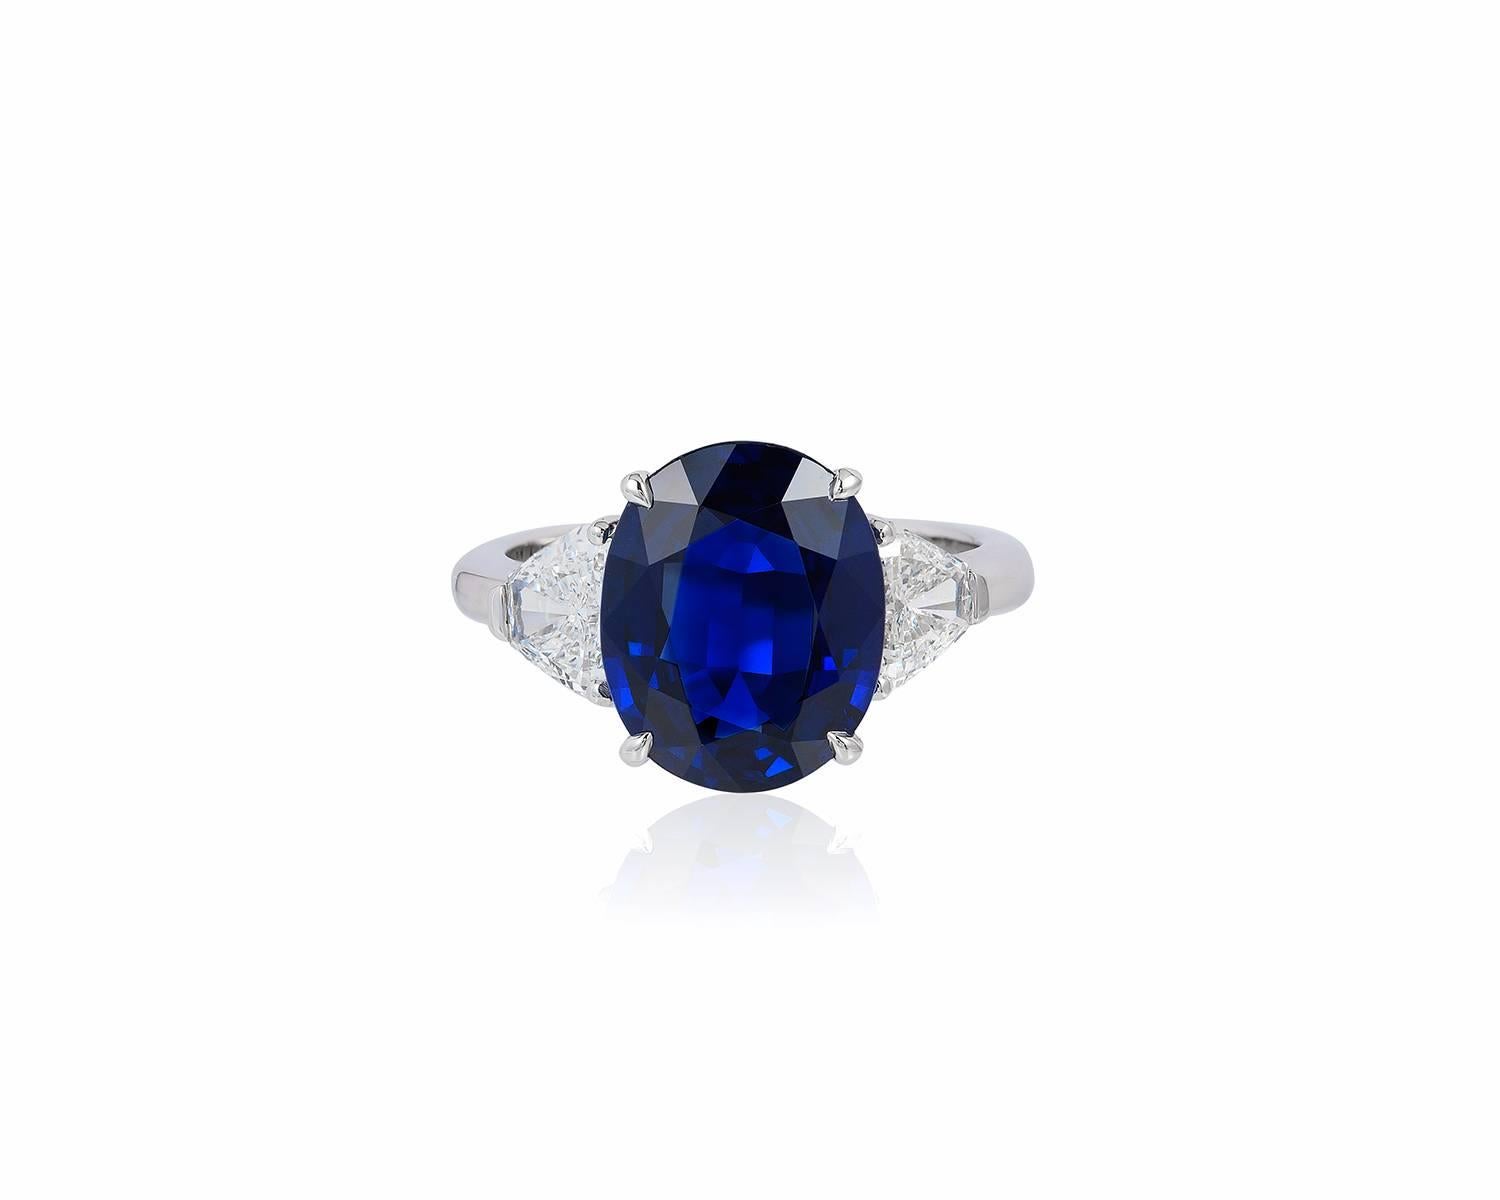 This ring is features a beautiful oval blue sapphire weighing 4.87 carats flanked on either side by shield shaped diamonds, all mounted in 18-karat white gold.
Ring size: 5.5